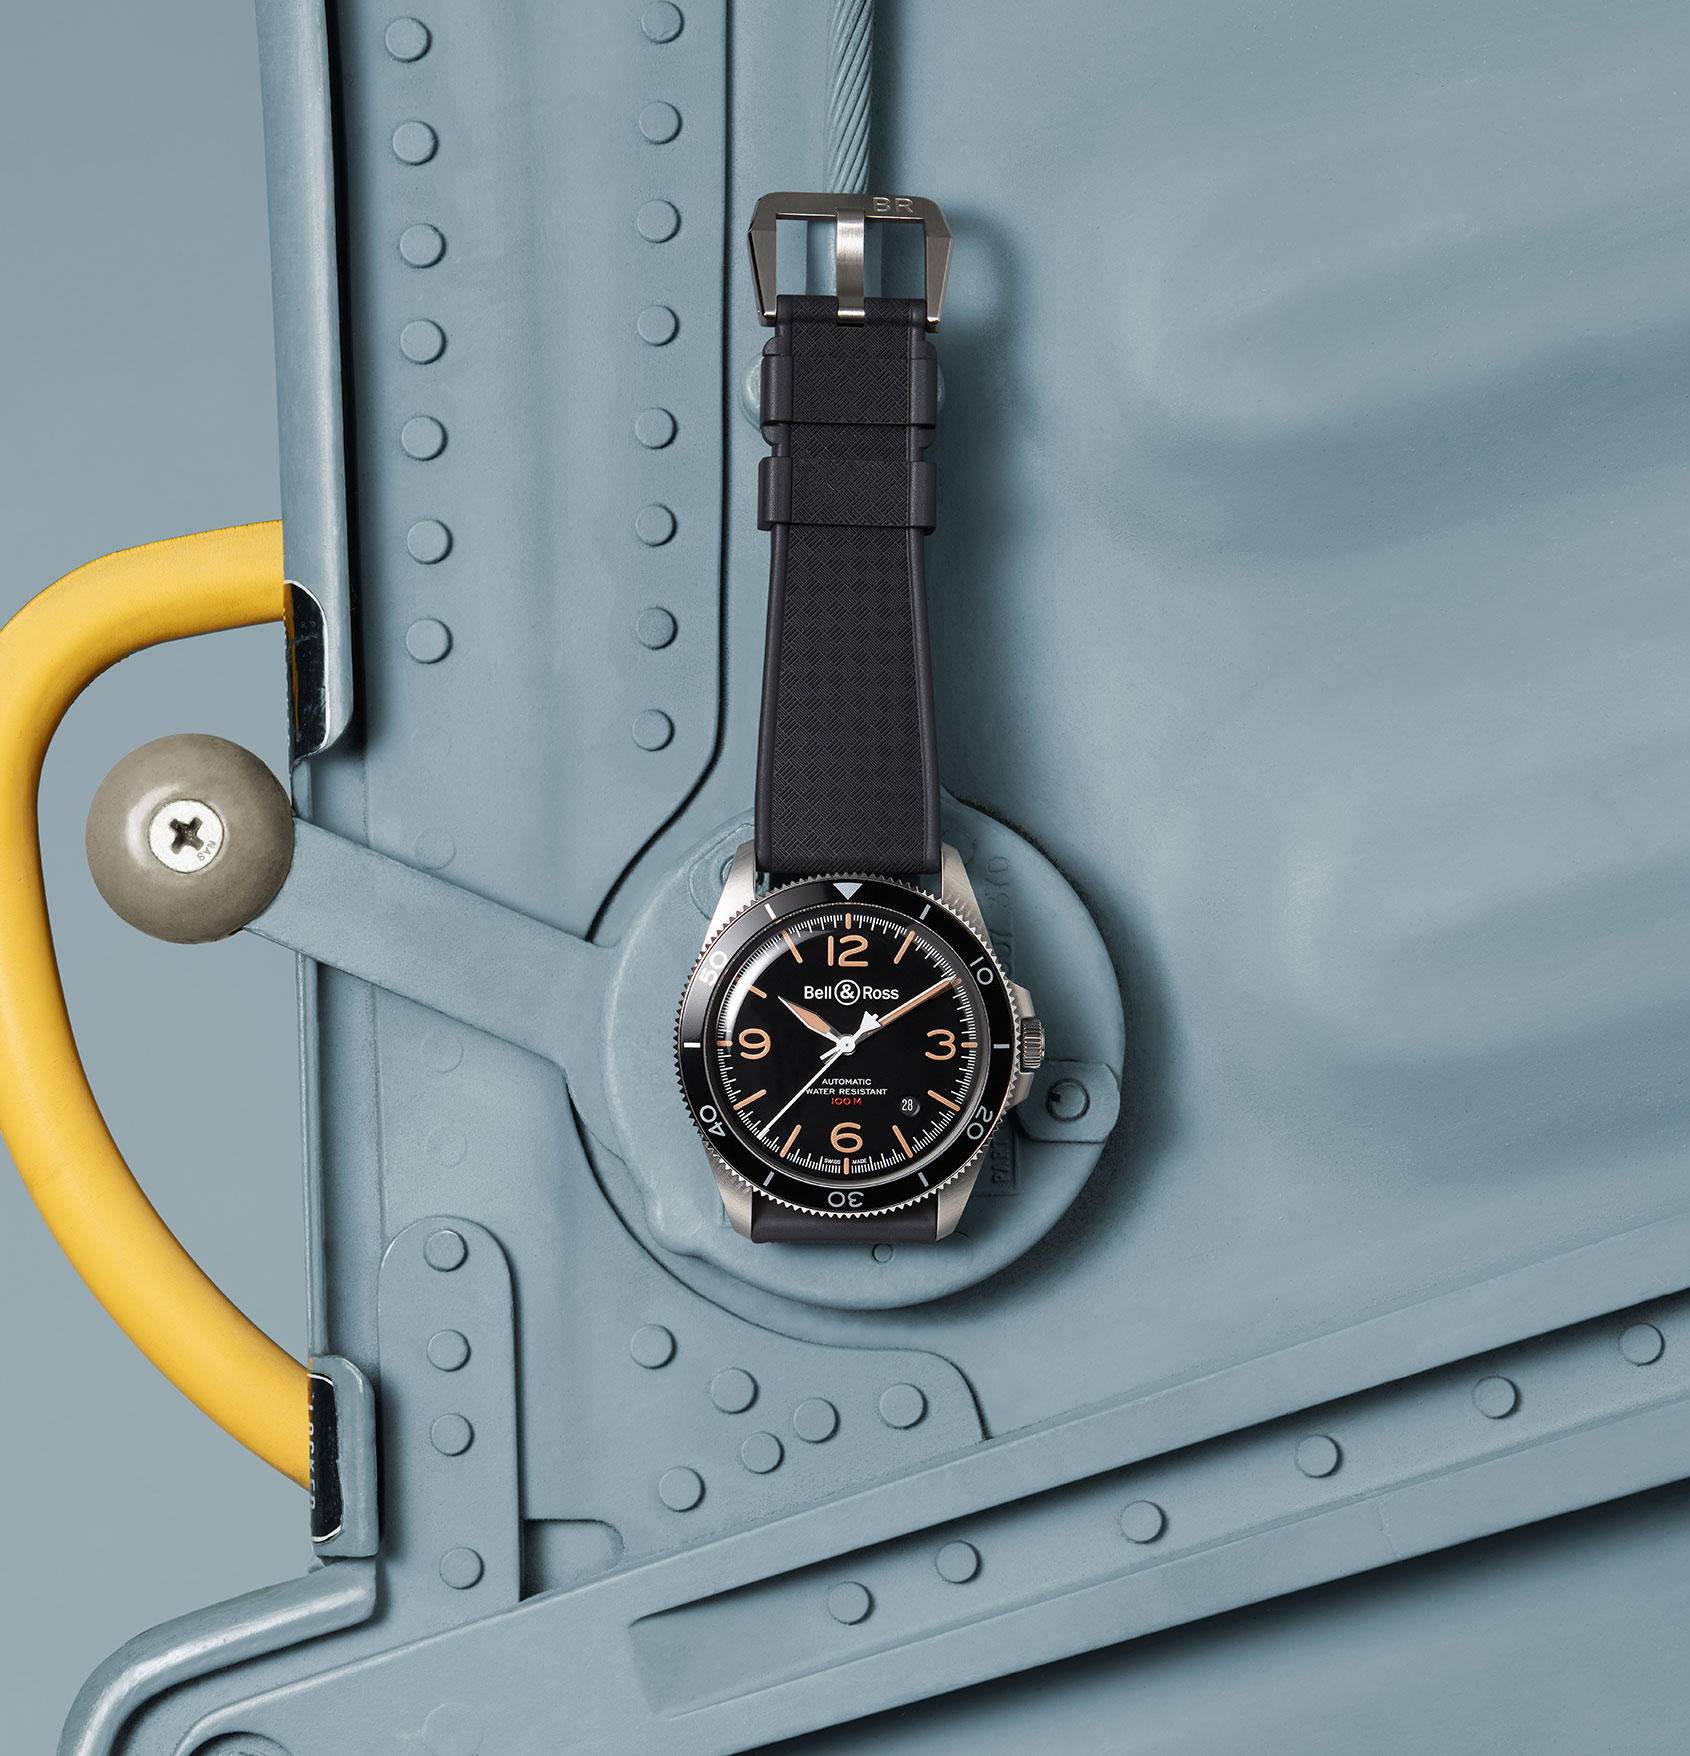 Introducing the Bell & Ross BR V2 Steel Heritage